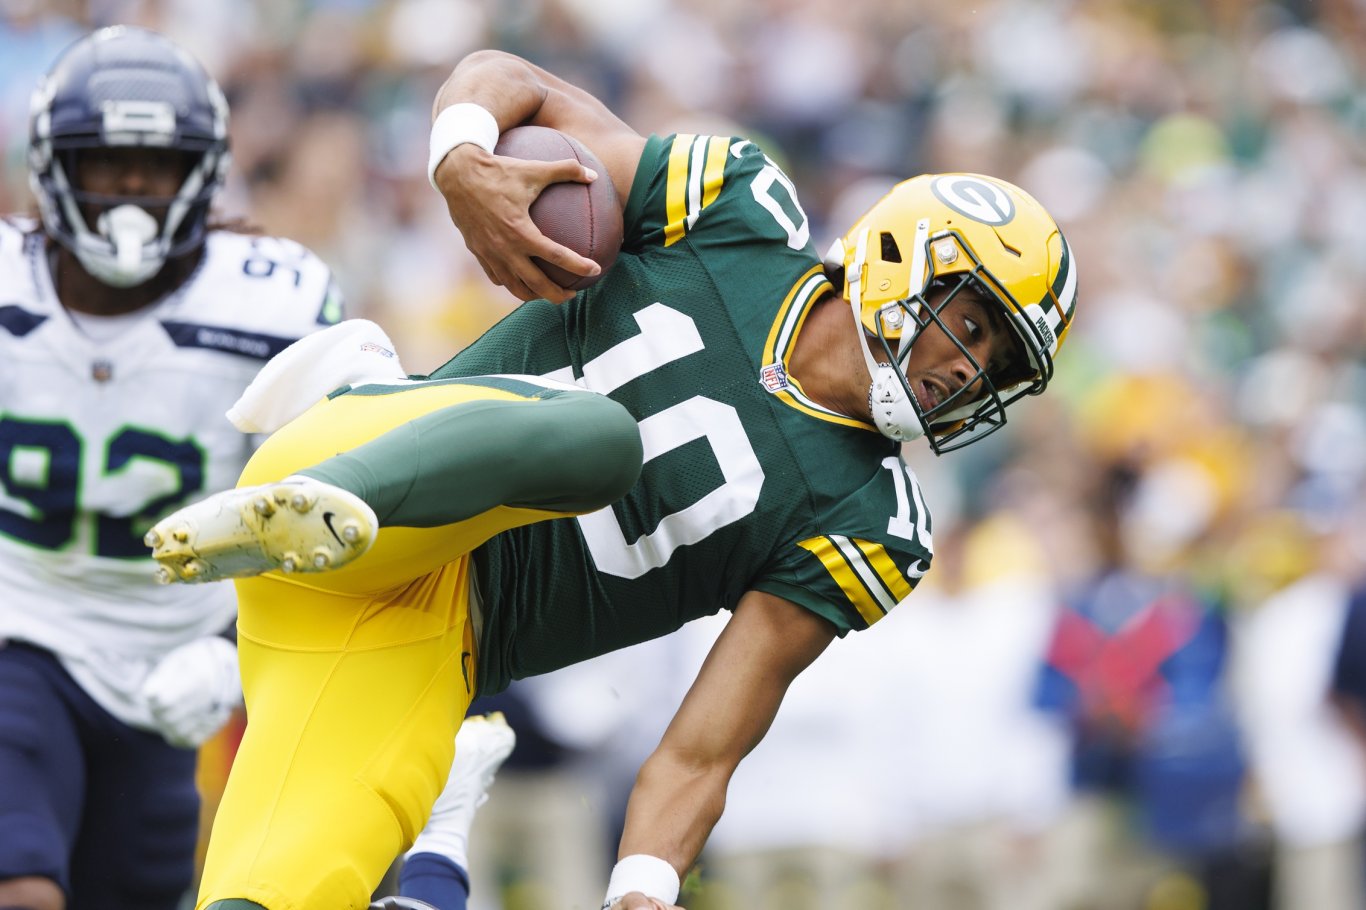 Lions, Packers battle for control of NFC North - Chicago Sun-Times